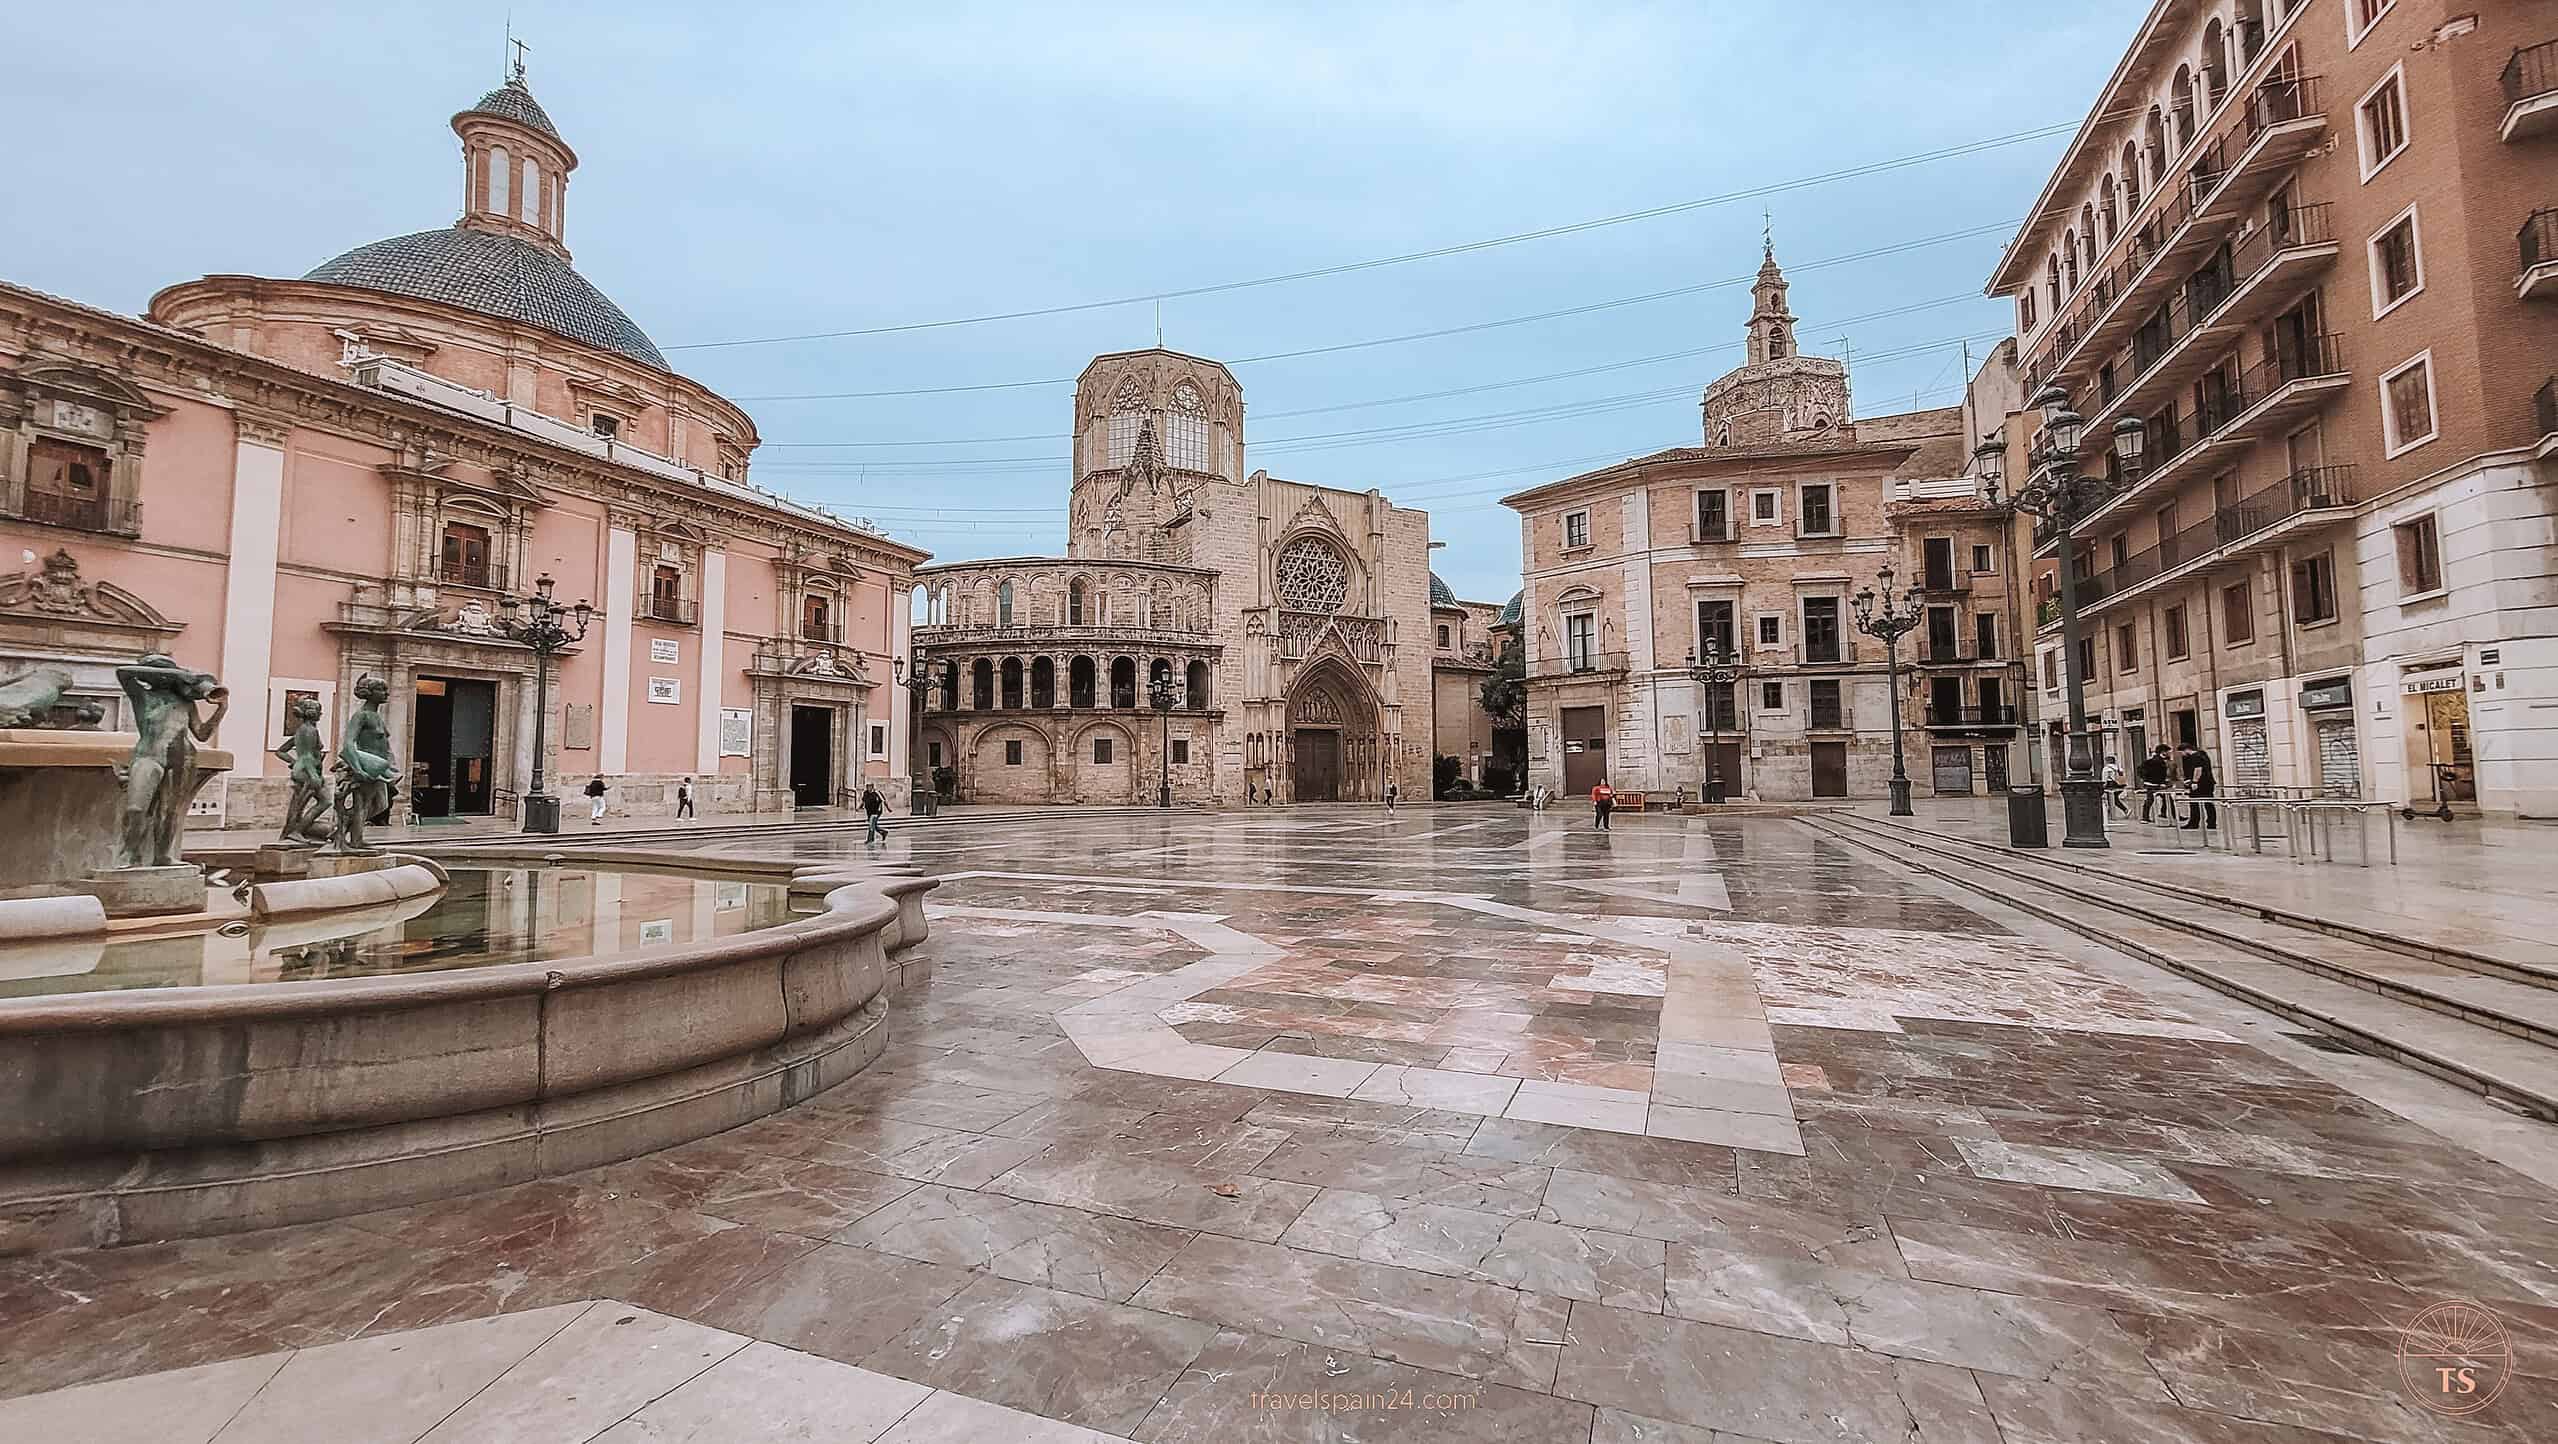 Early morning view of Plaza de la Virgen in Valencia, nearly empty and perfect for photography, with light clouds and the sun just starting to rise